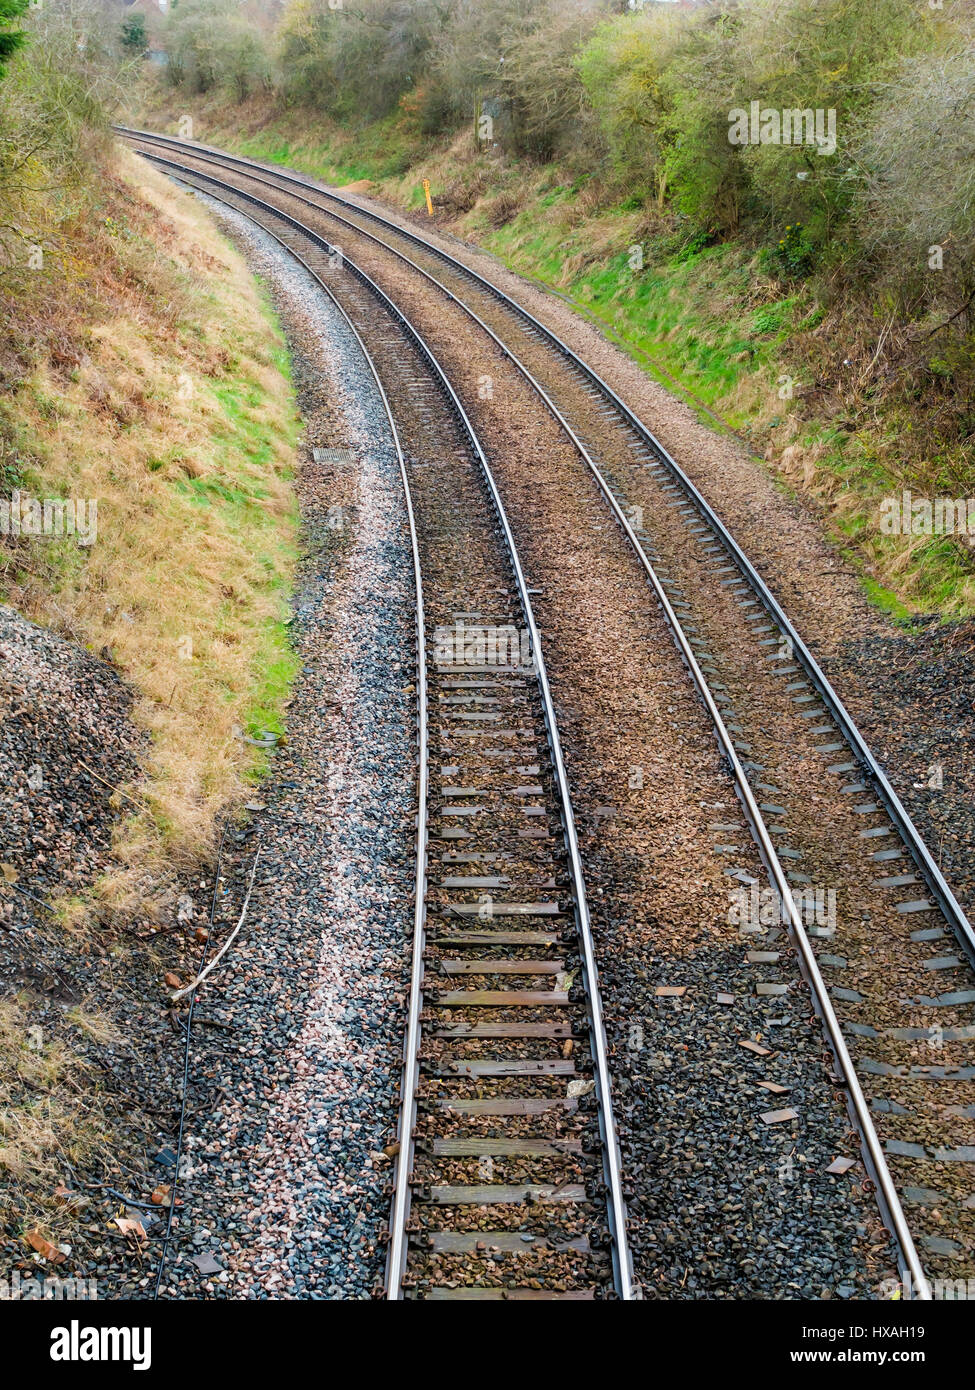 Two standard gauge railway lines on a curve in a cutting Stock Photo